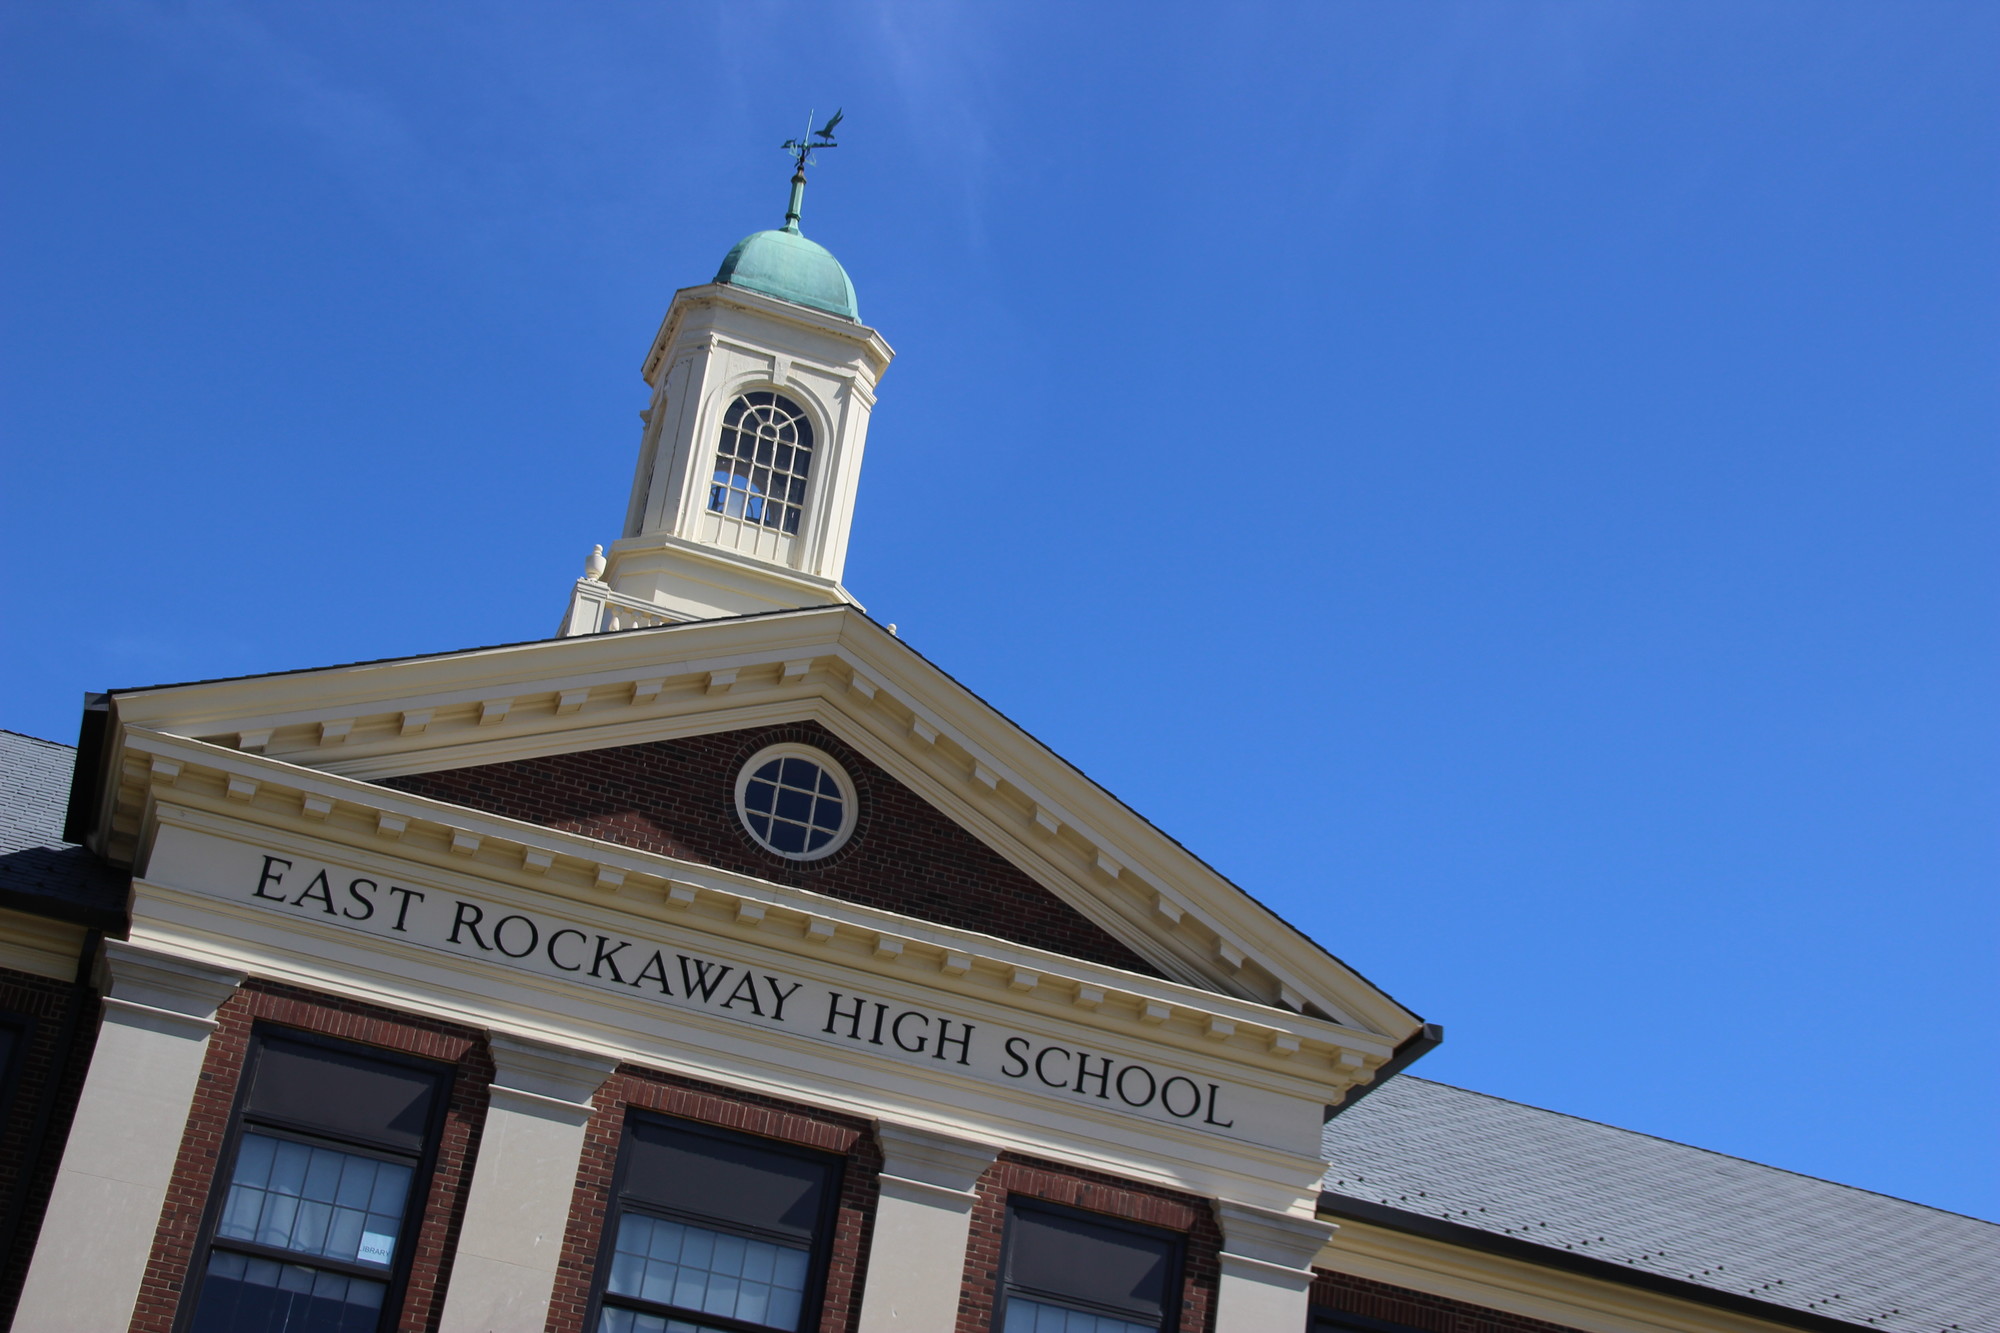 The East Rockaway School District adopted a $38 million budget proposal on April 19, which translates to about $78,000 in additional revenue from taxpayers — or an increase of $6 on the average annual property tax bill per household.